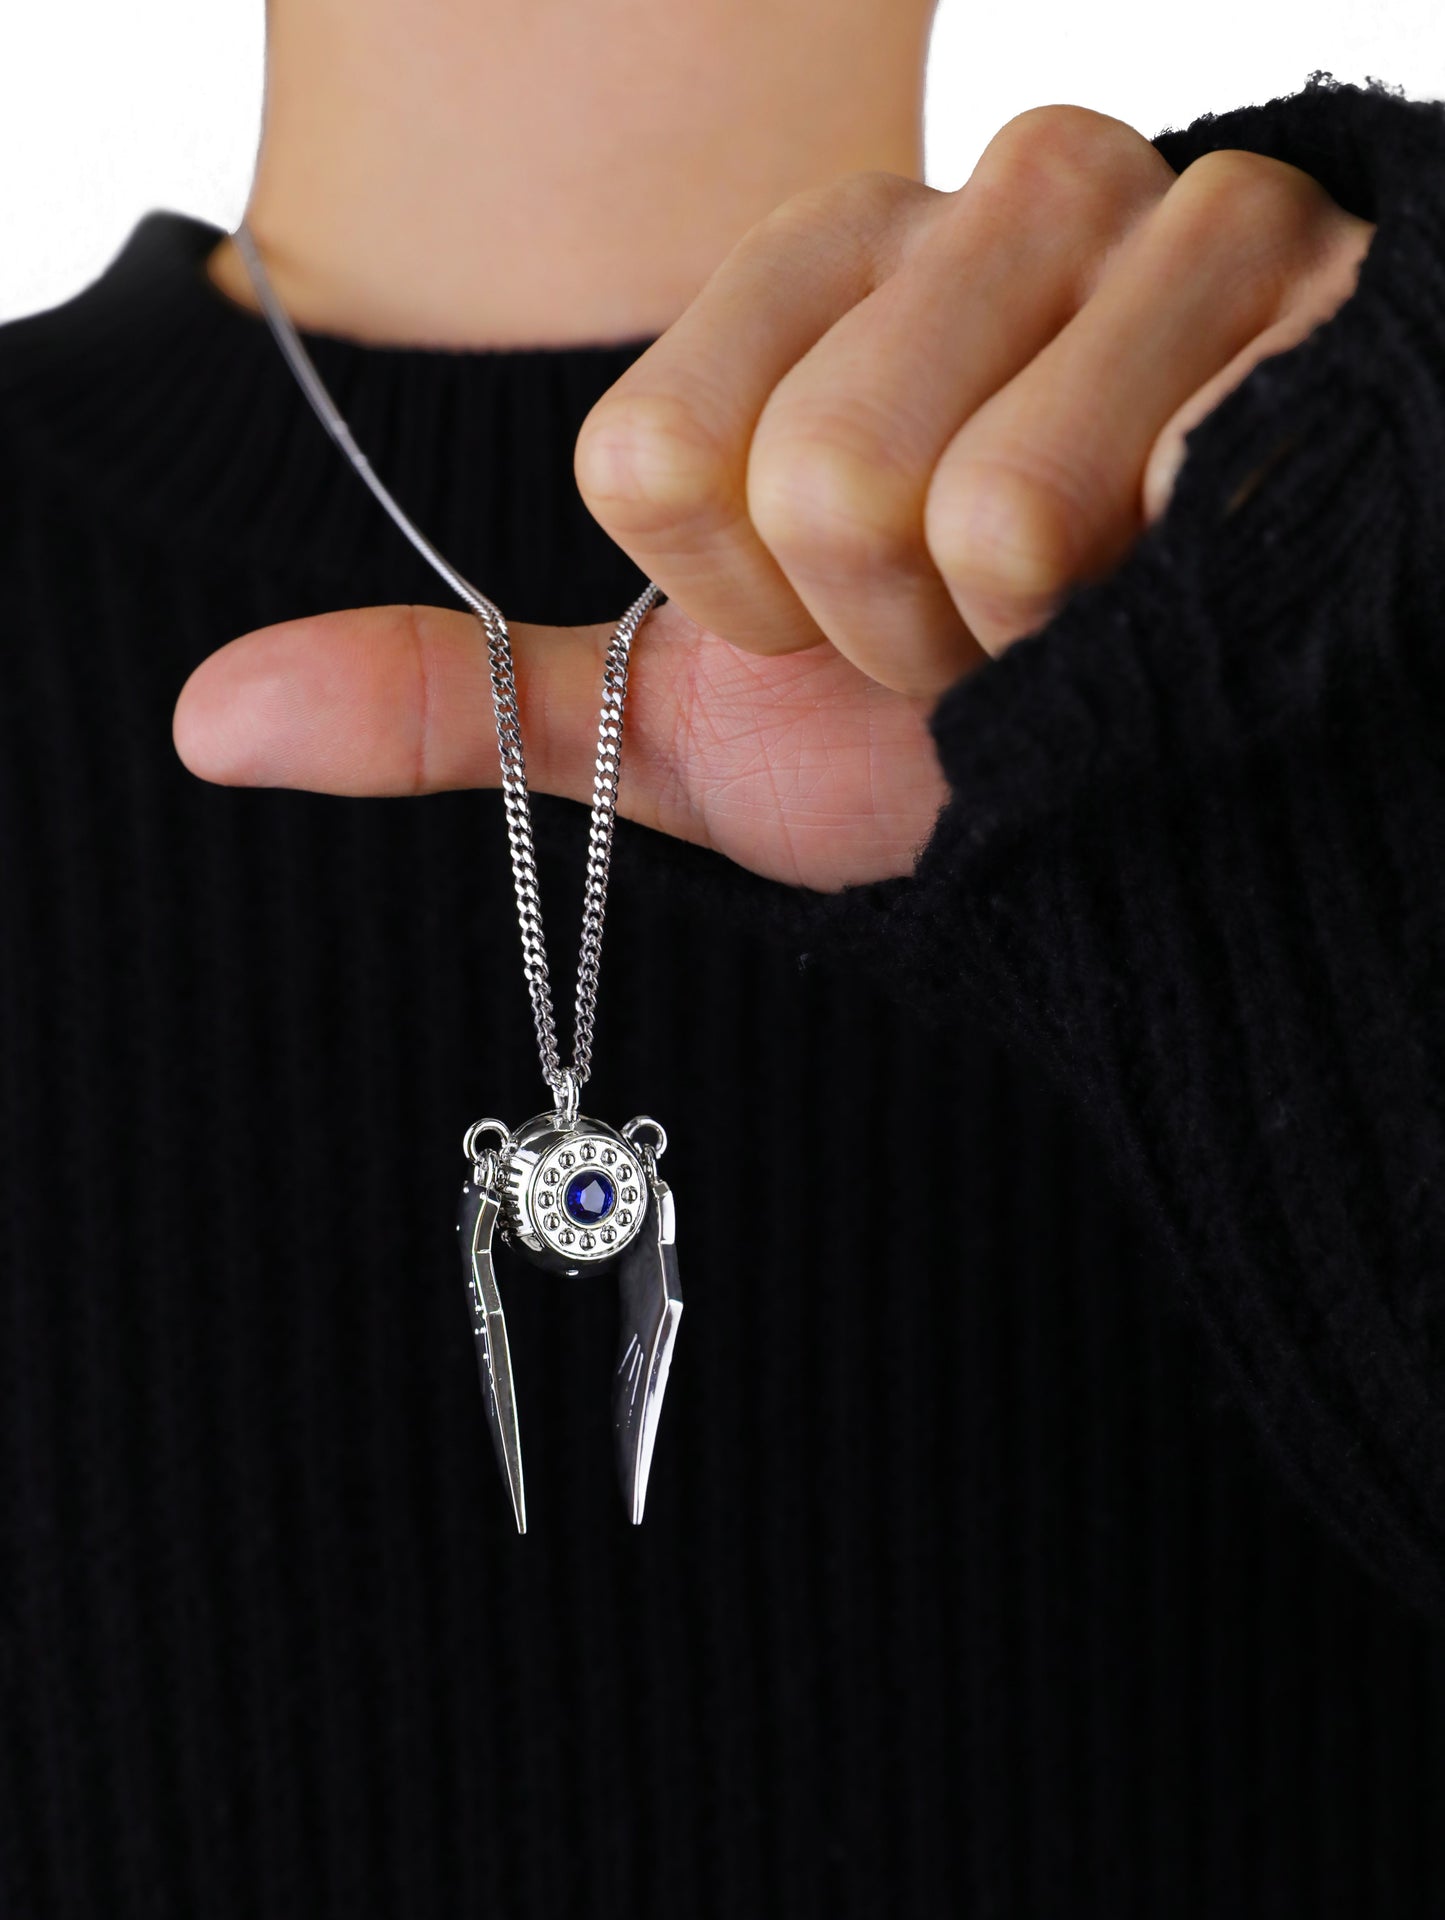 Tomorrow's Girl Series - Angel Eye Necklace (Silver)